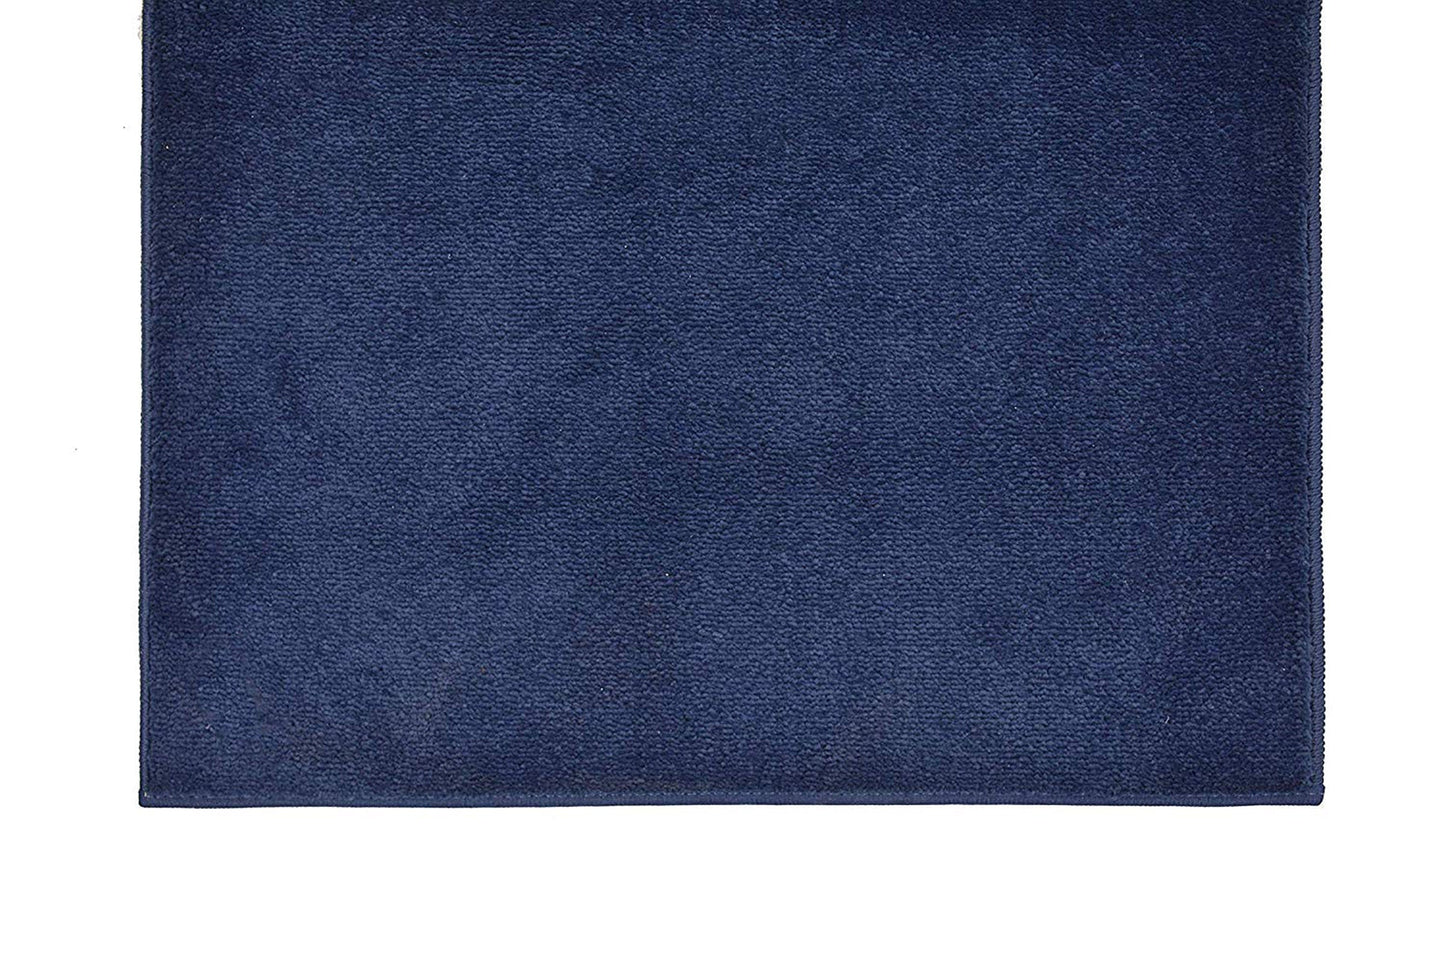 Machine Washable Custom Size Runner Rug Solid Navy Blue Color Skid Resistant Rug Runner Customize Up to 50 Feet and 36 Inch Width Runner Rug